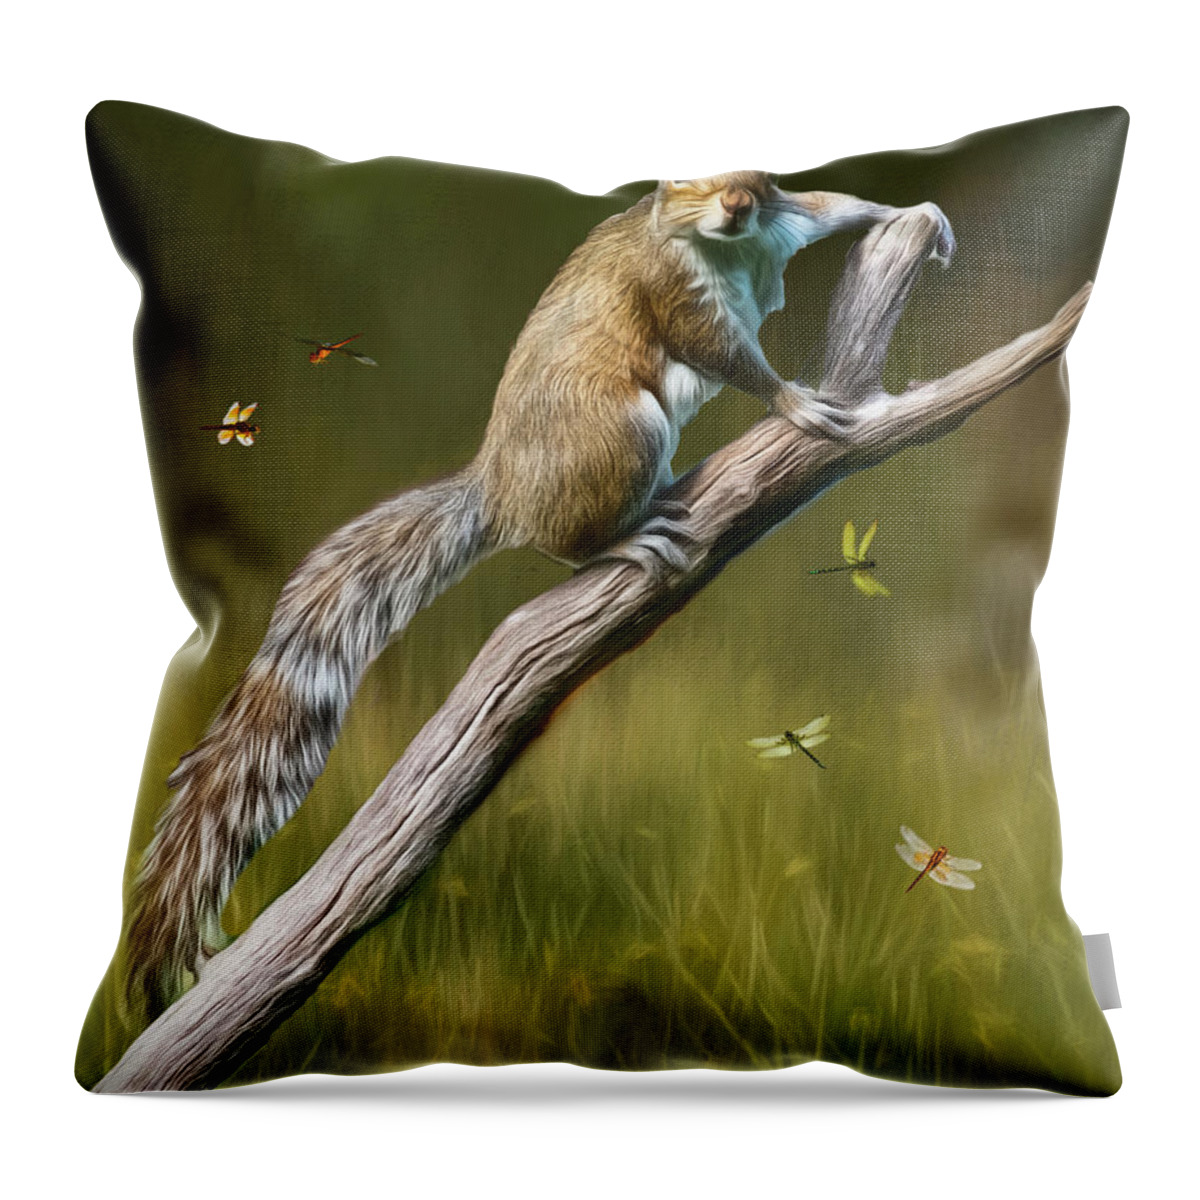 Wilklife Throw Pillow featuring the photograph Whats Up by Cathy Kovarik